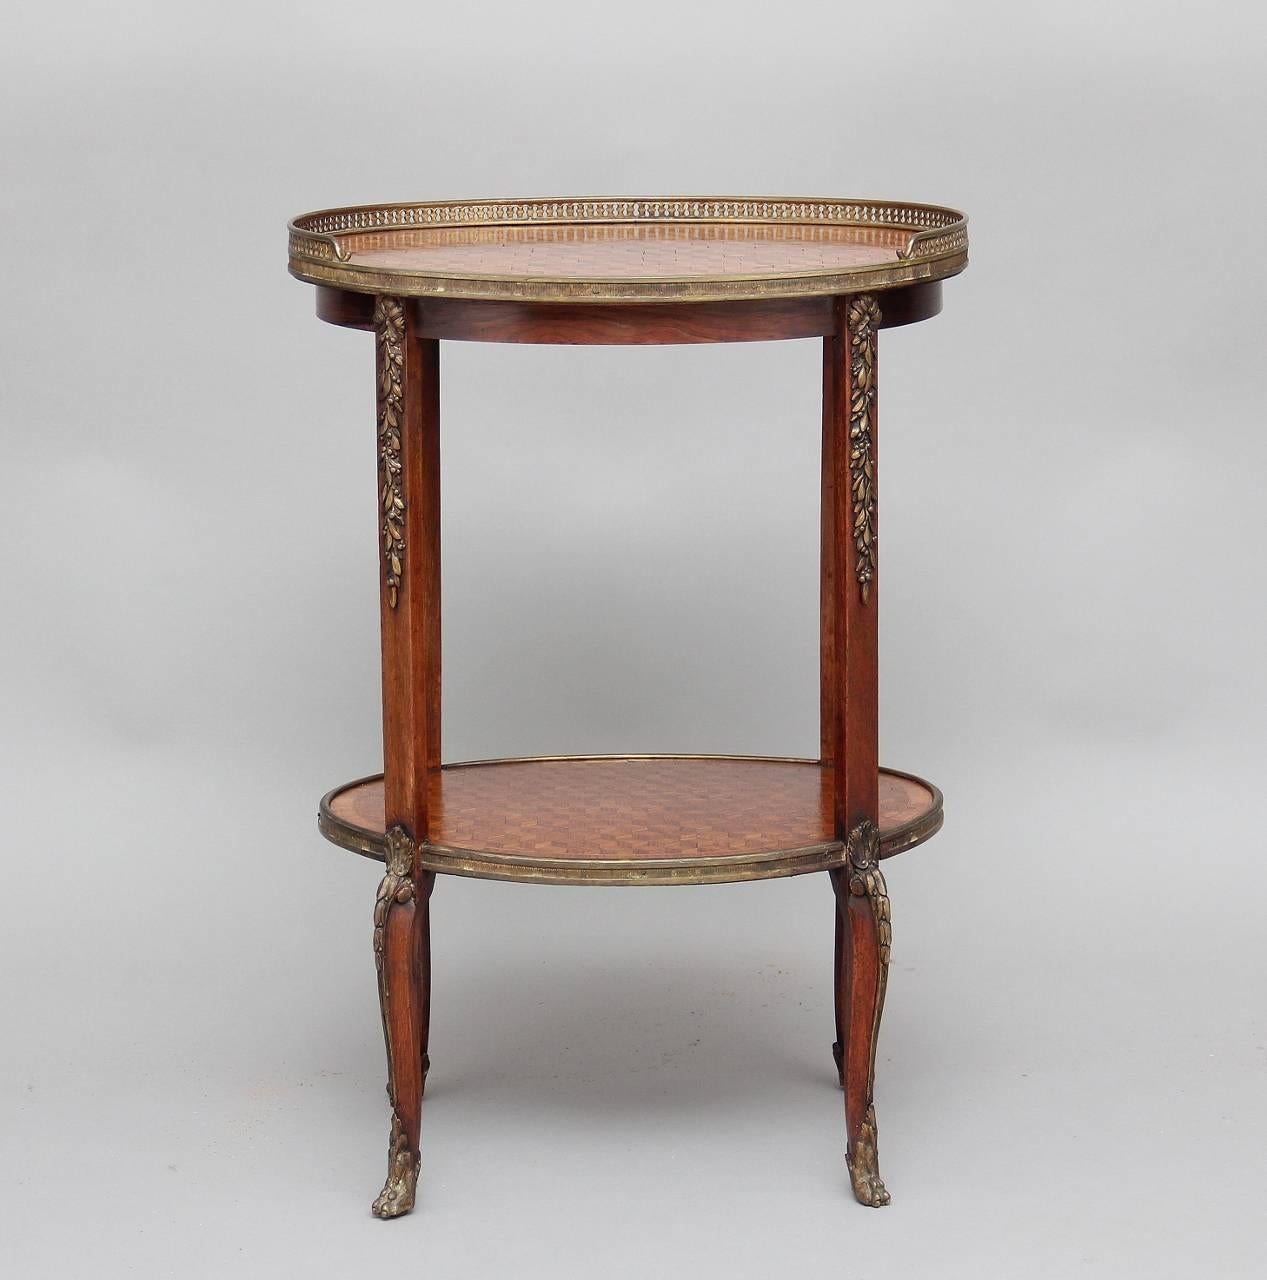 19th century French kingwood and parquetry etagere, with a parquetry top and shelf, the top having a three quarter brass gallery, with four supports decorated with brass mounts, standing on shaped slender legs decorated also with brass mounts, circa